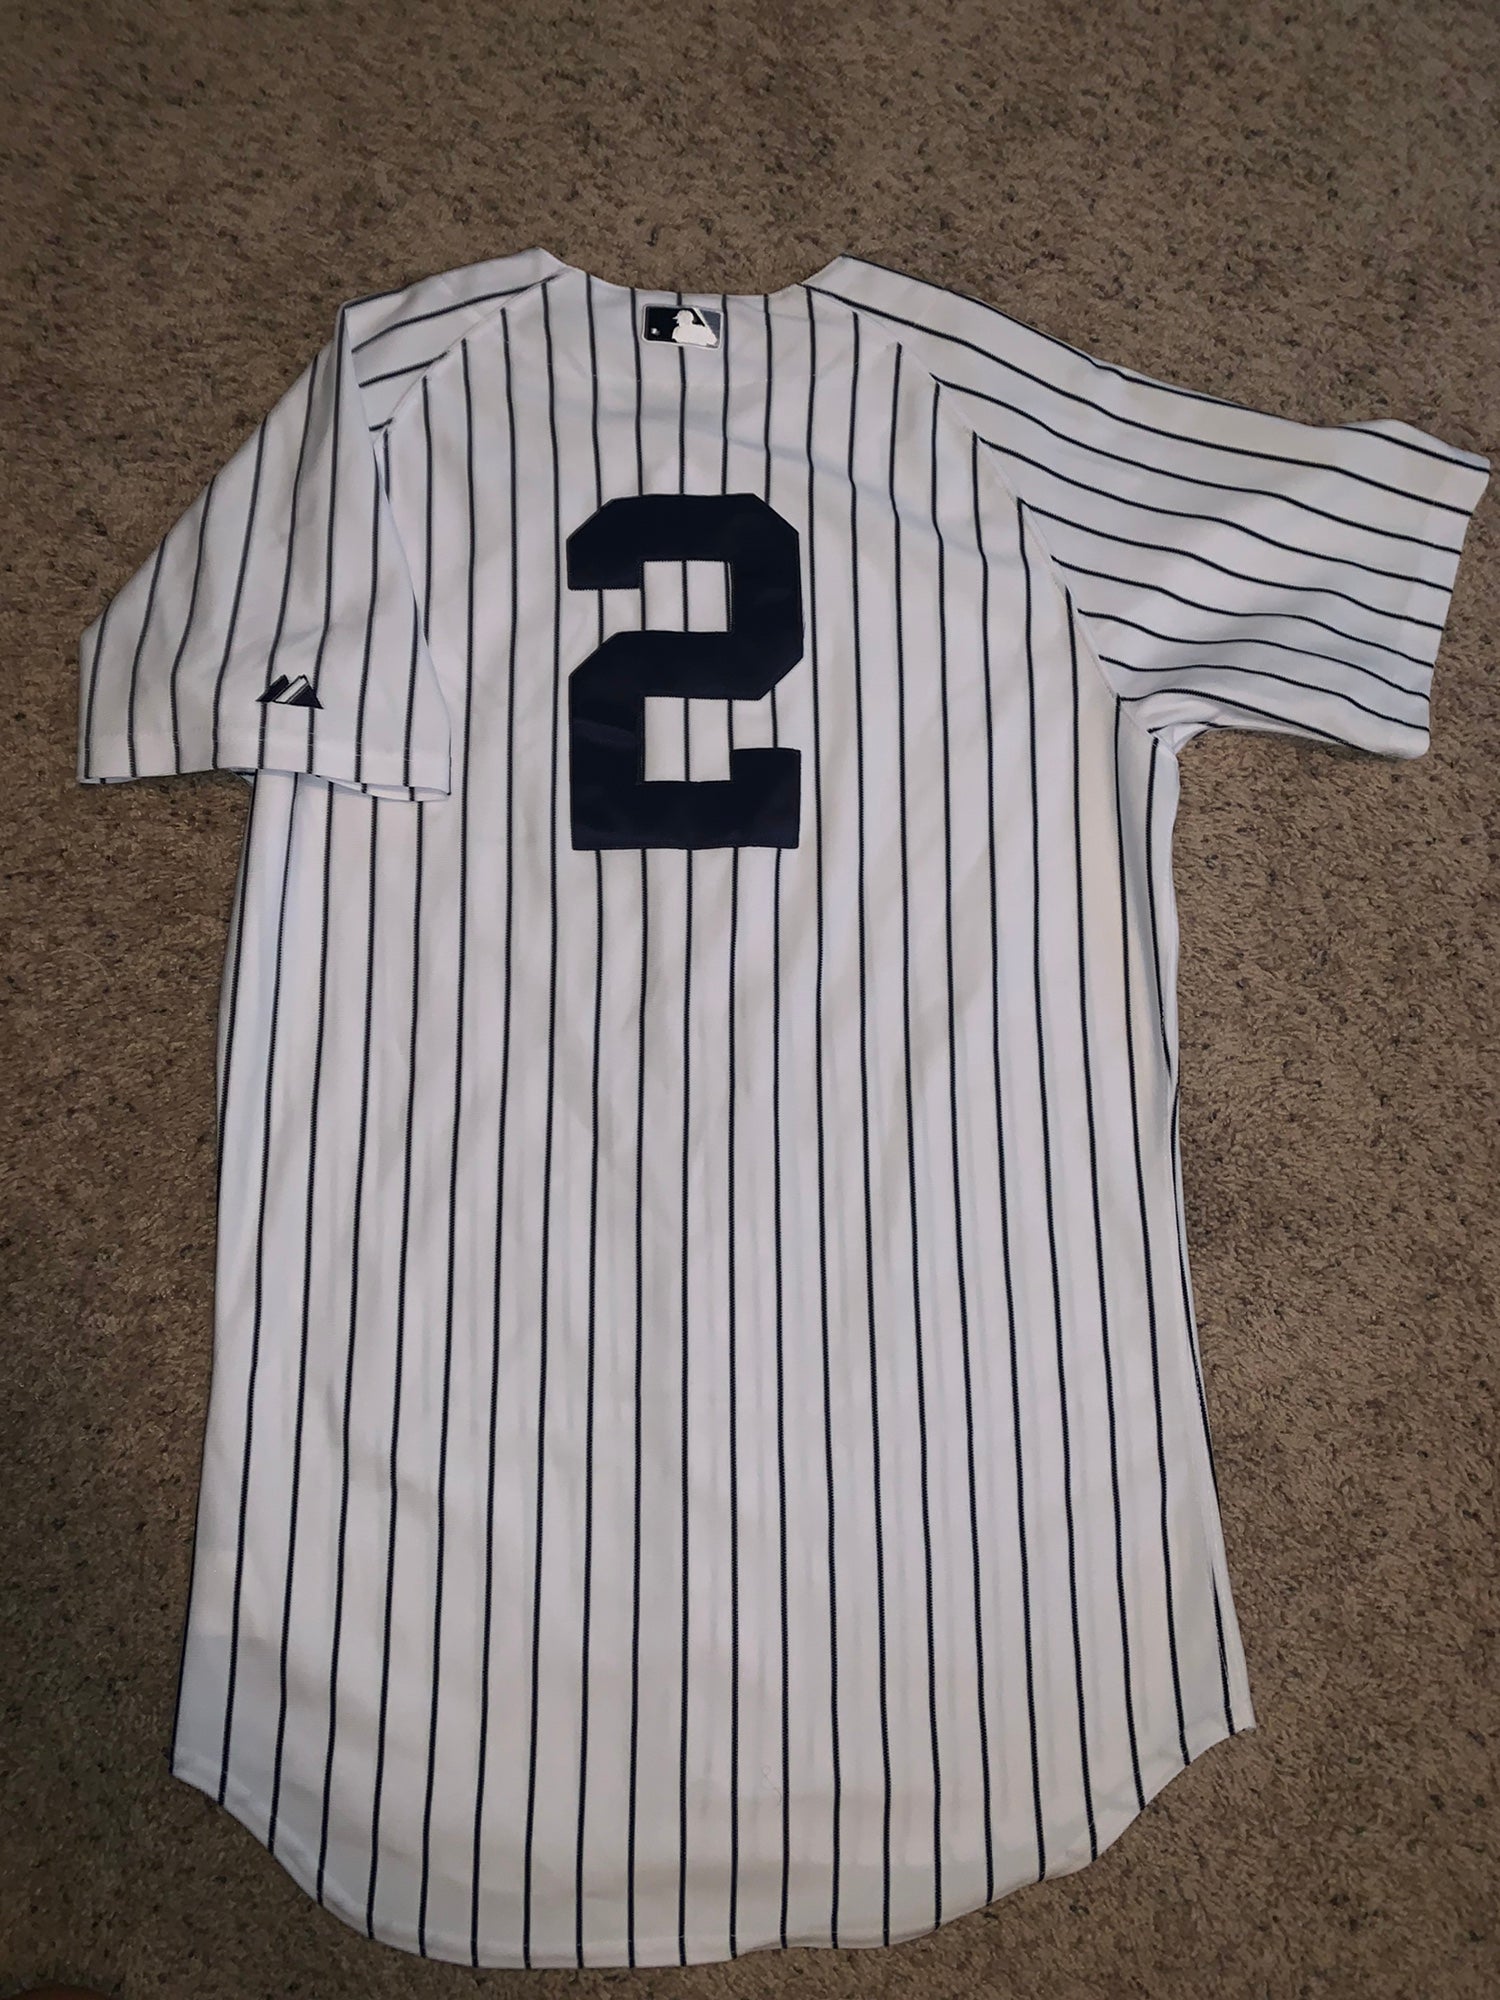 Yogi Berra 8 New York Yankees Jersey Size 40 New With Tag